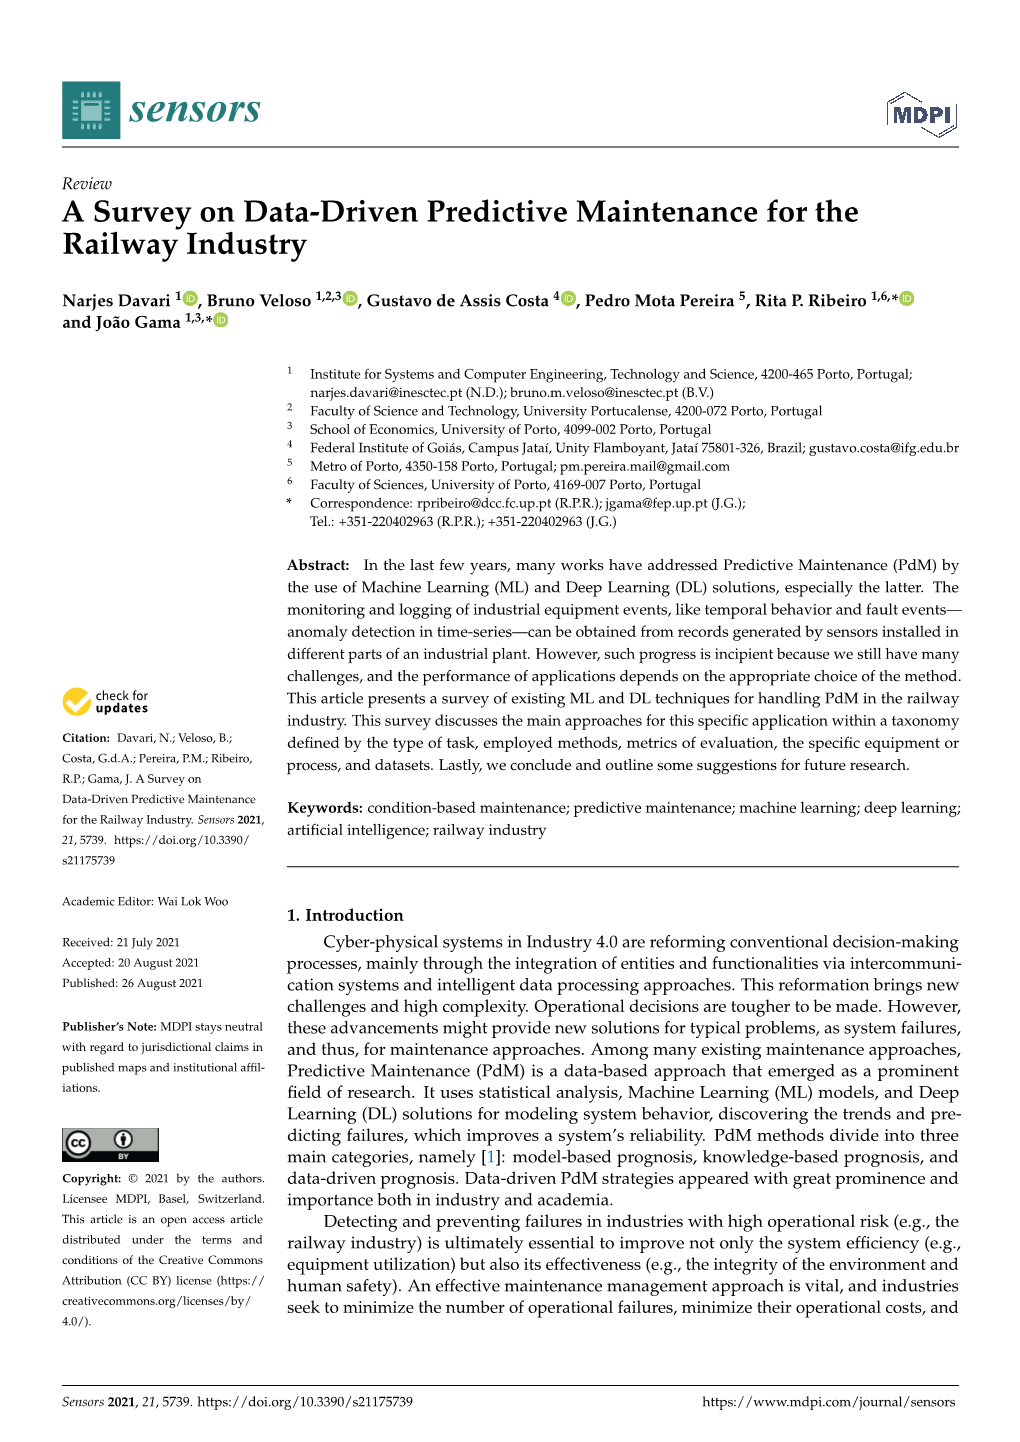 A Survey on Data-Driven Predictive Maintenance for the Railway Industry